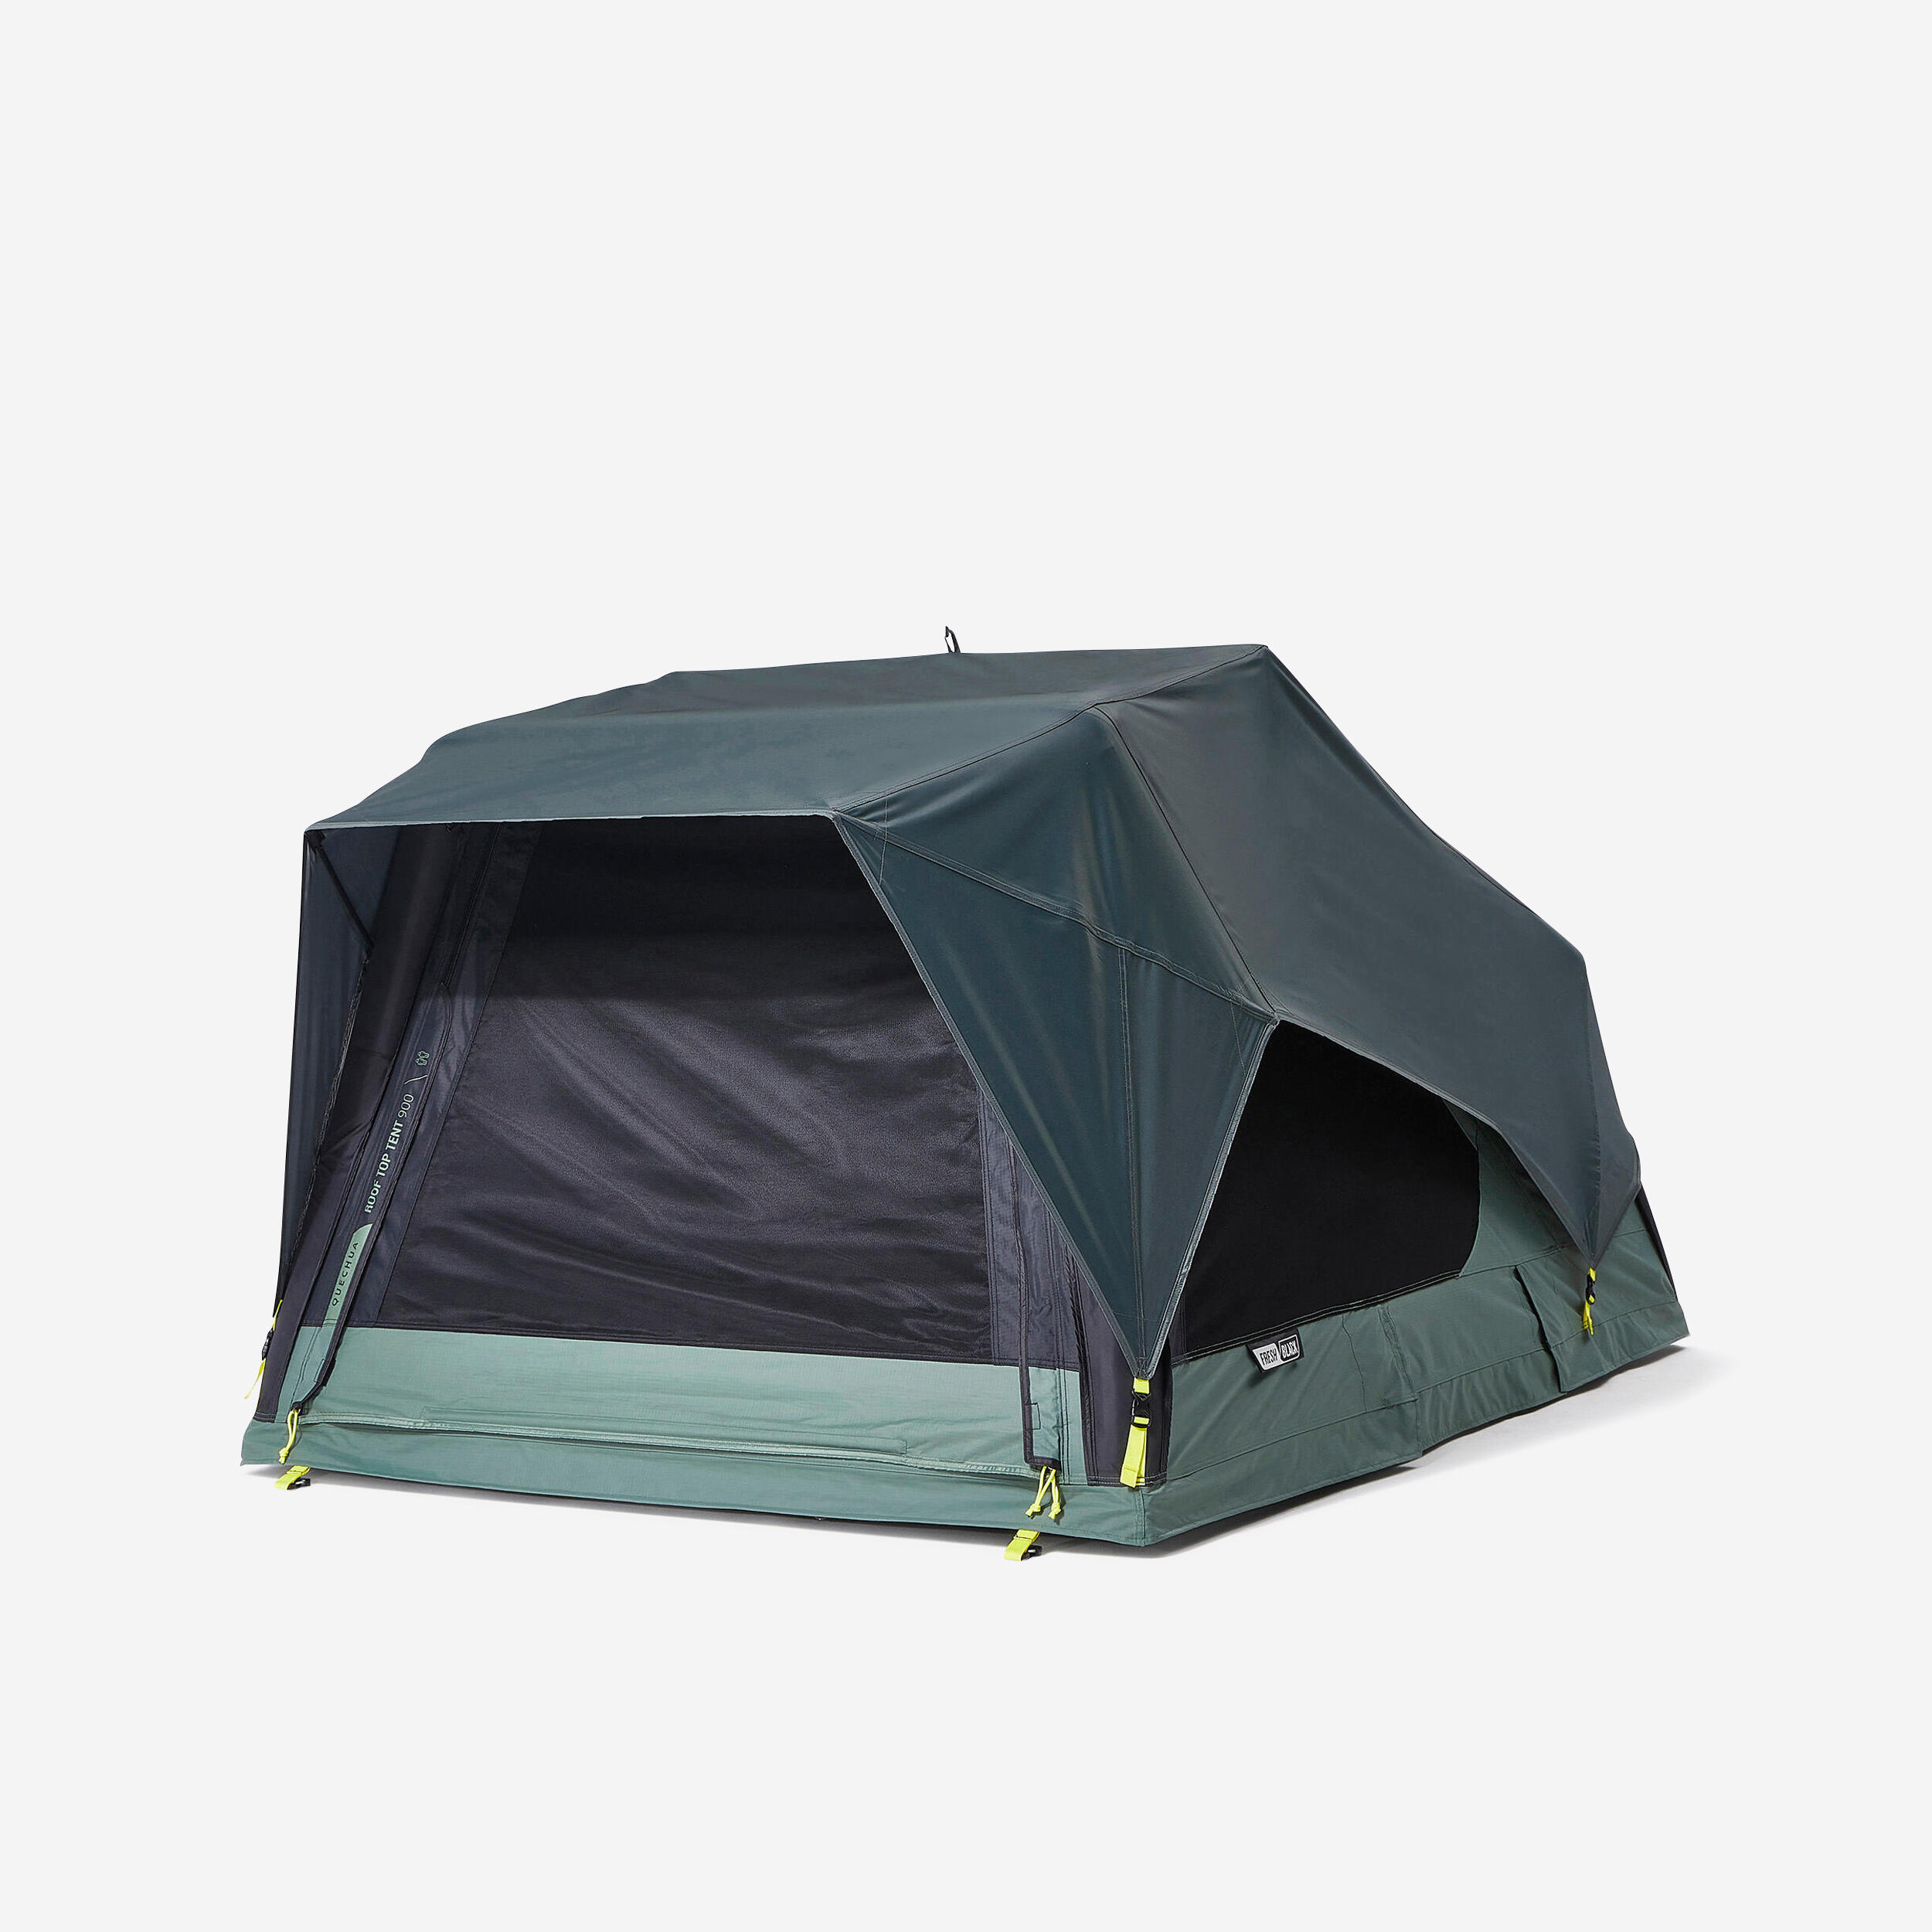 INFLATABLE ROOF TENT MH900 FRESH & BLACK 2 PERSON  1/20